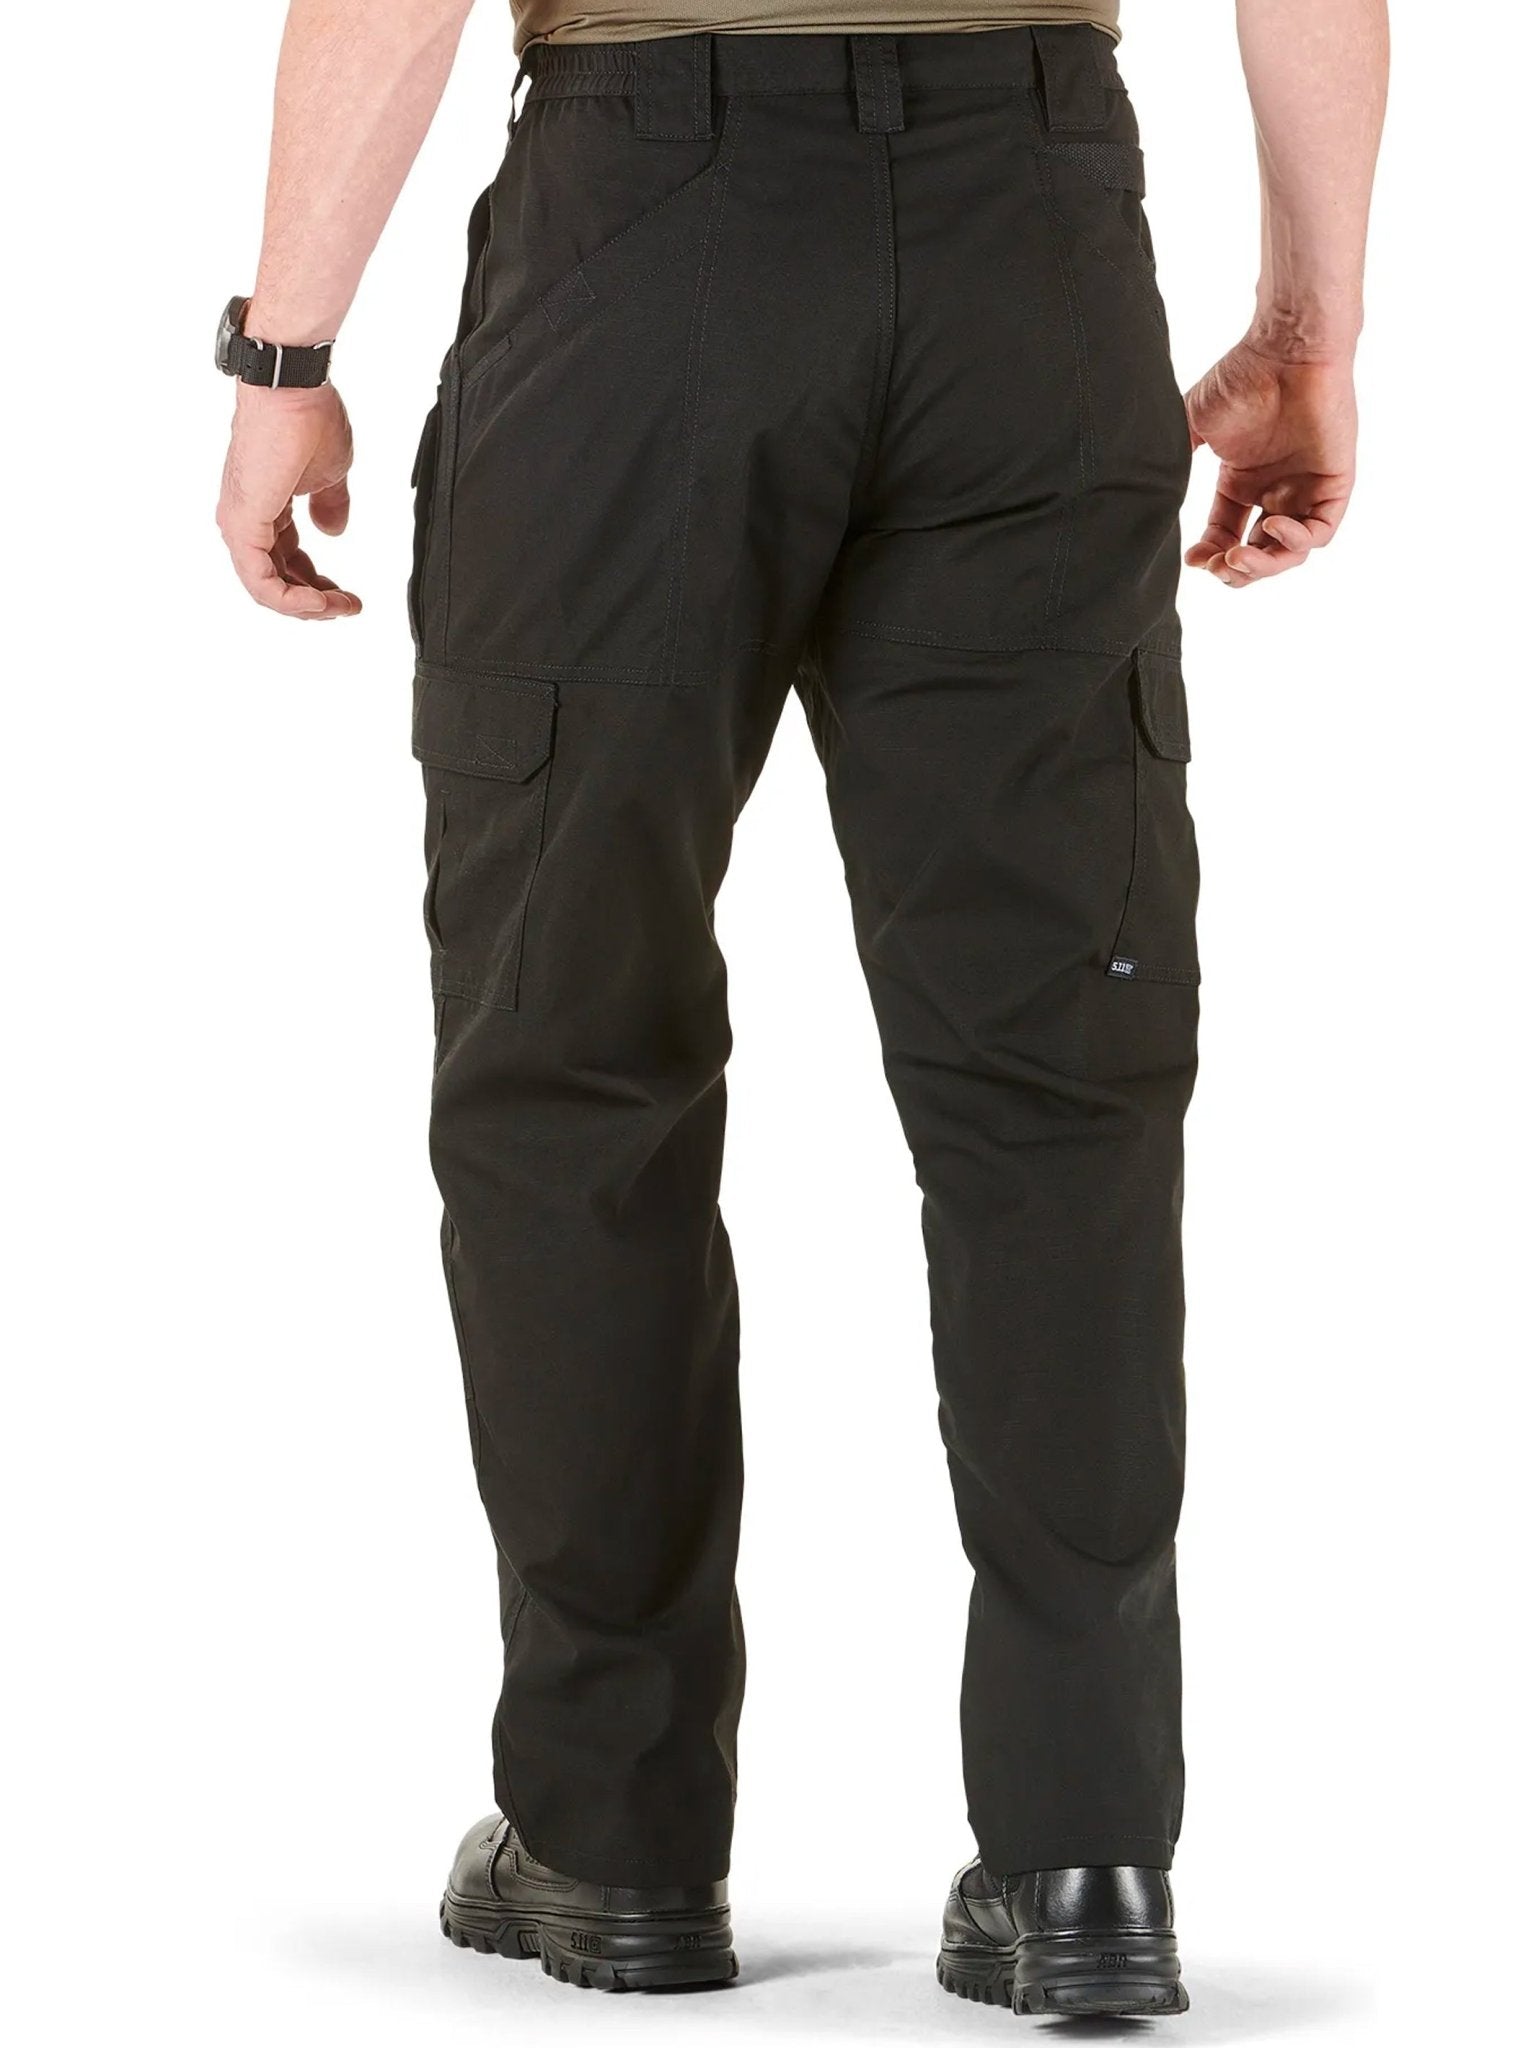 4elementsclothing5.11 Tactical5.11 Tactical - TACLITE® PRO RIPSTOP PANT - Mens TACLITE PRO trouser, 8 pockets, Teflon finished, cuff pocket - Style 74273Trousers & Jeans74273-019-30Wx32L